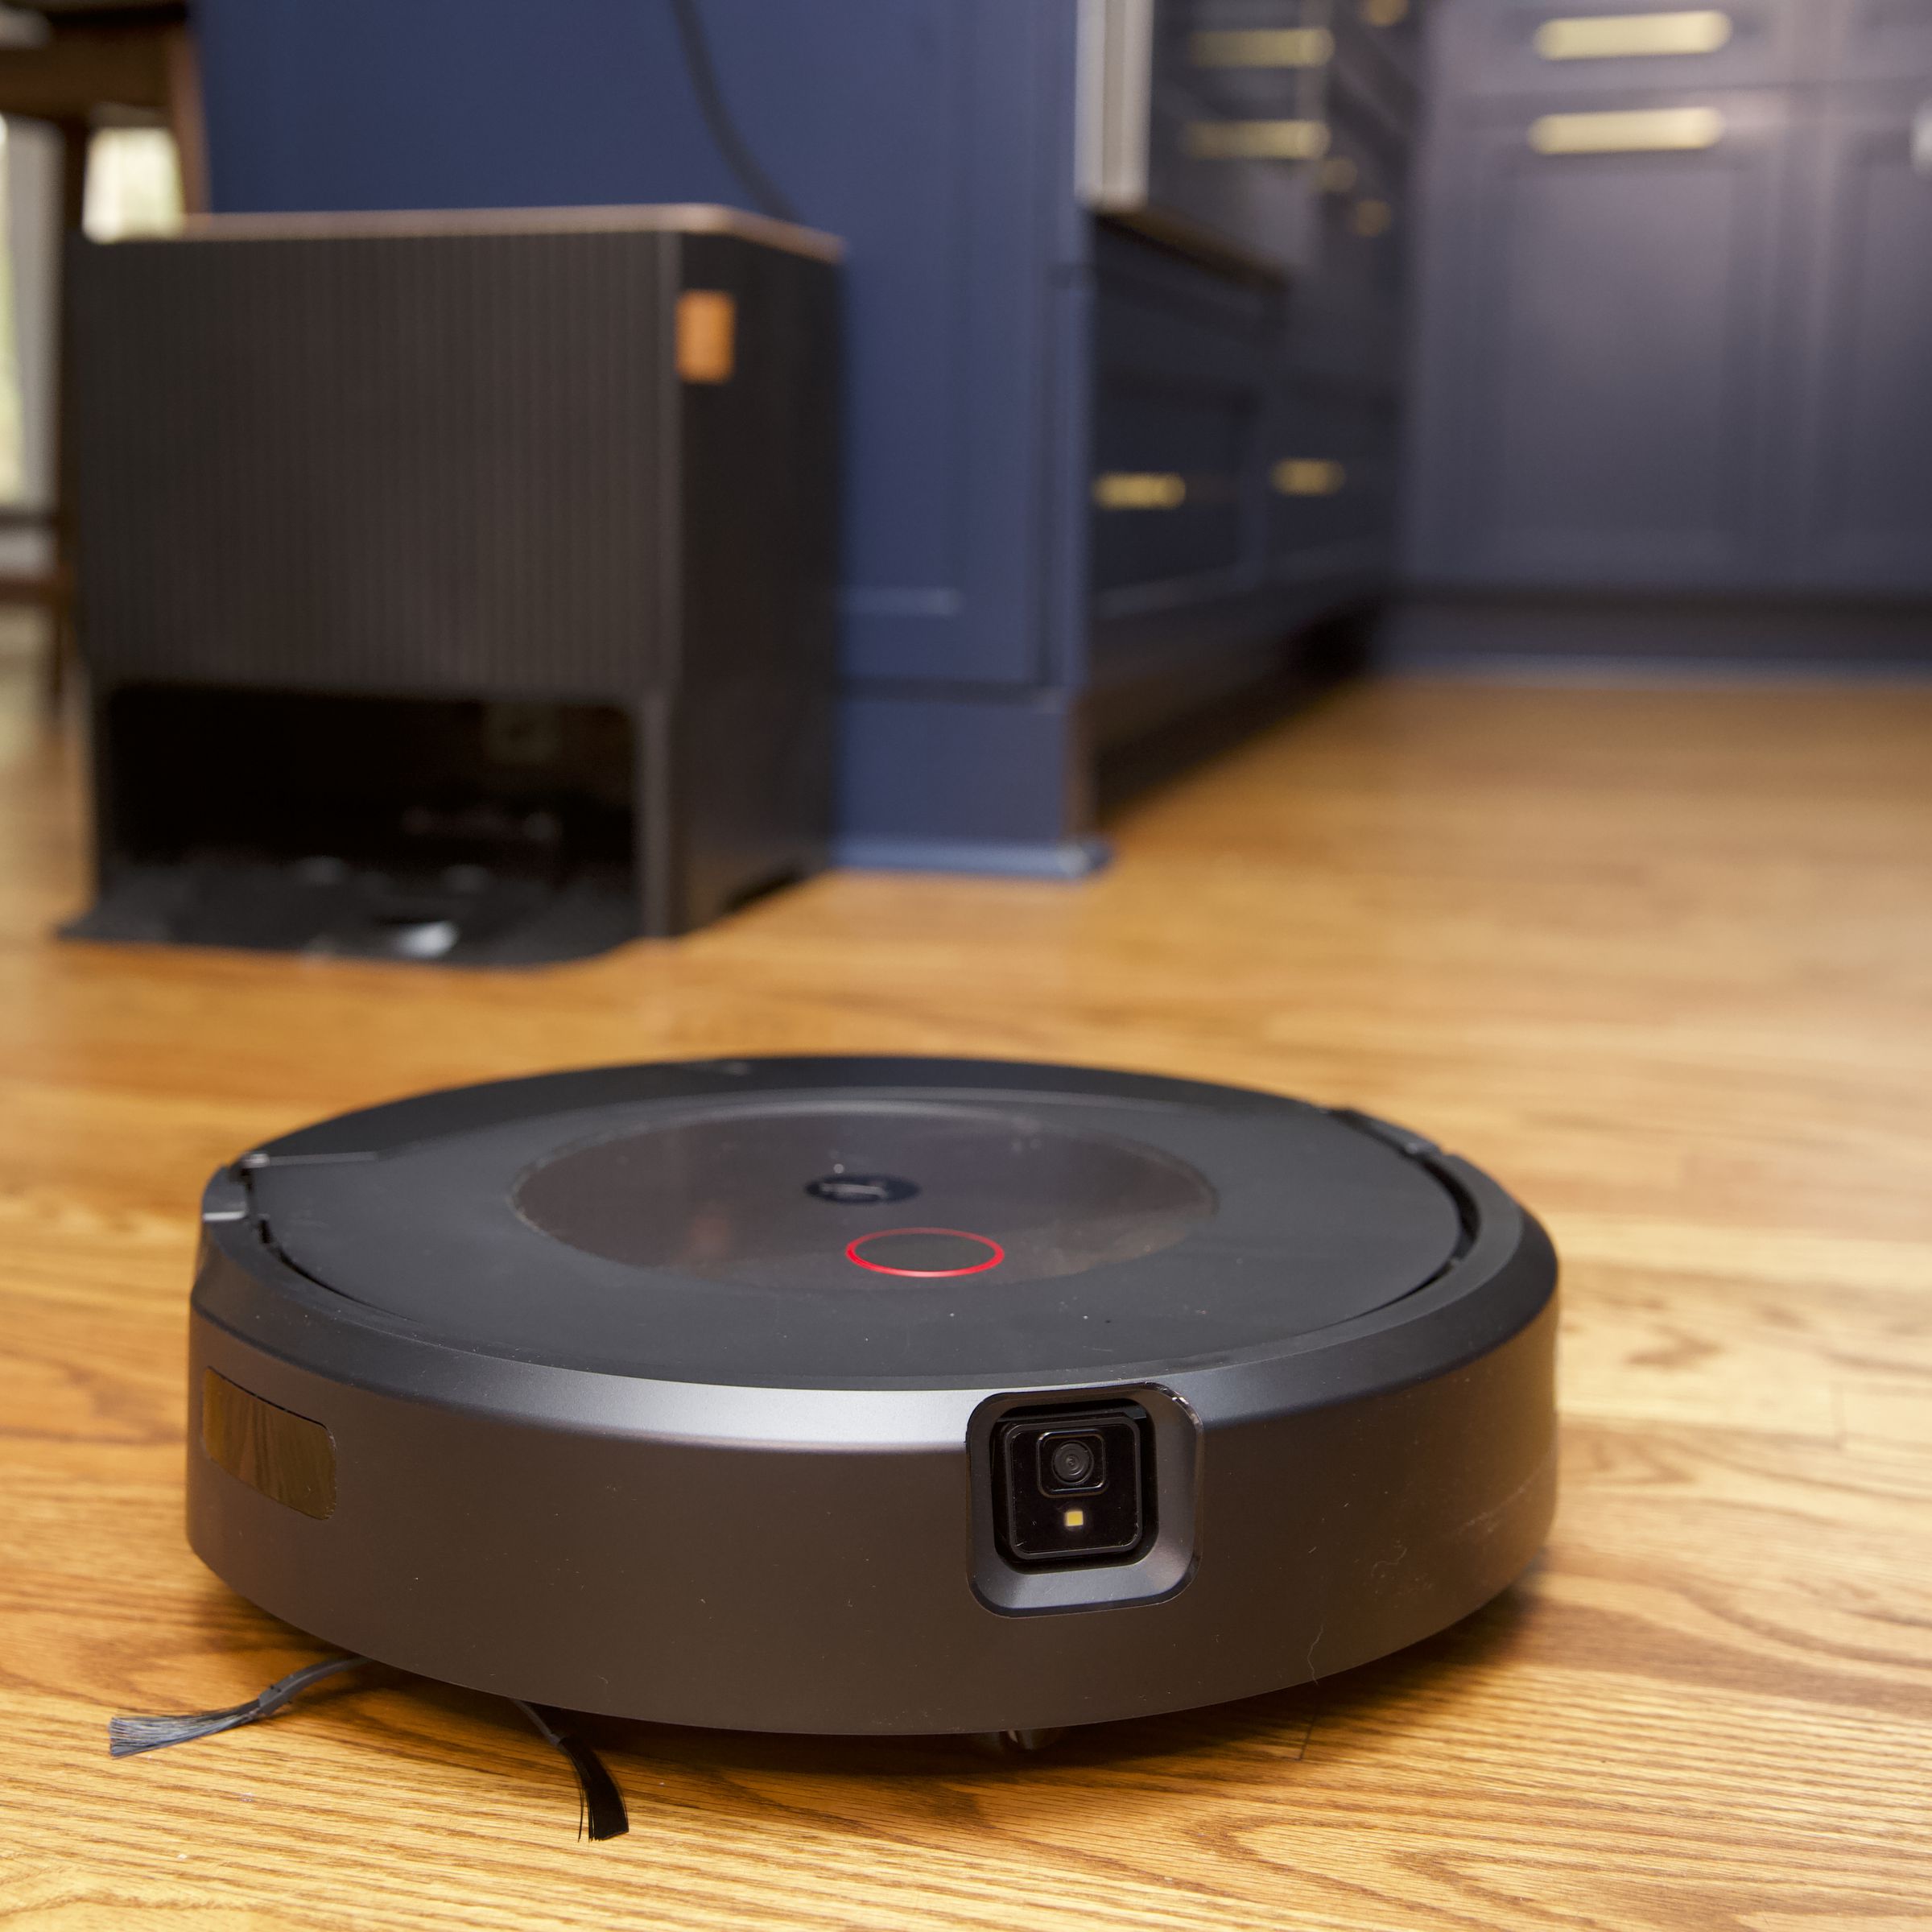 The newest Roomba vacuum — the Combo j9 Plus — faces stiff competition.